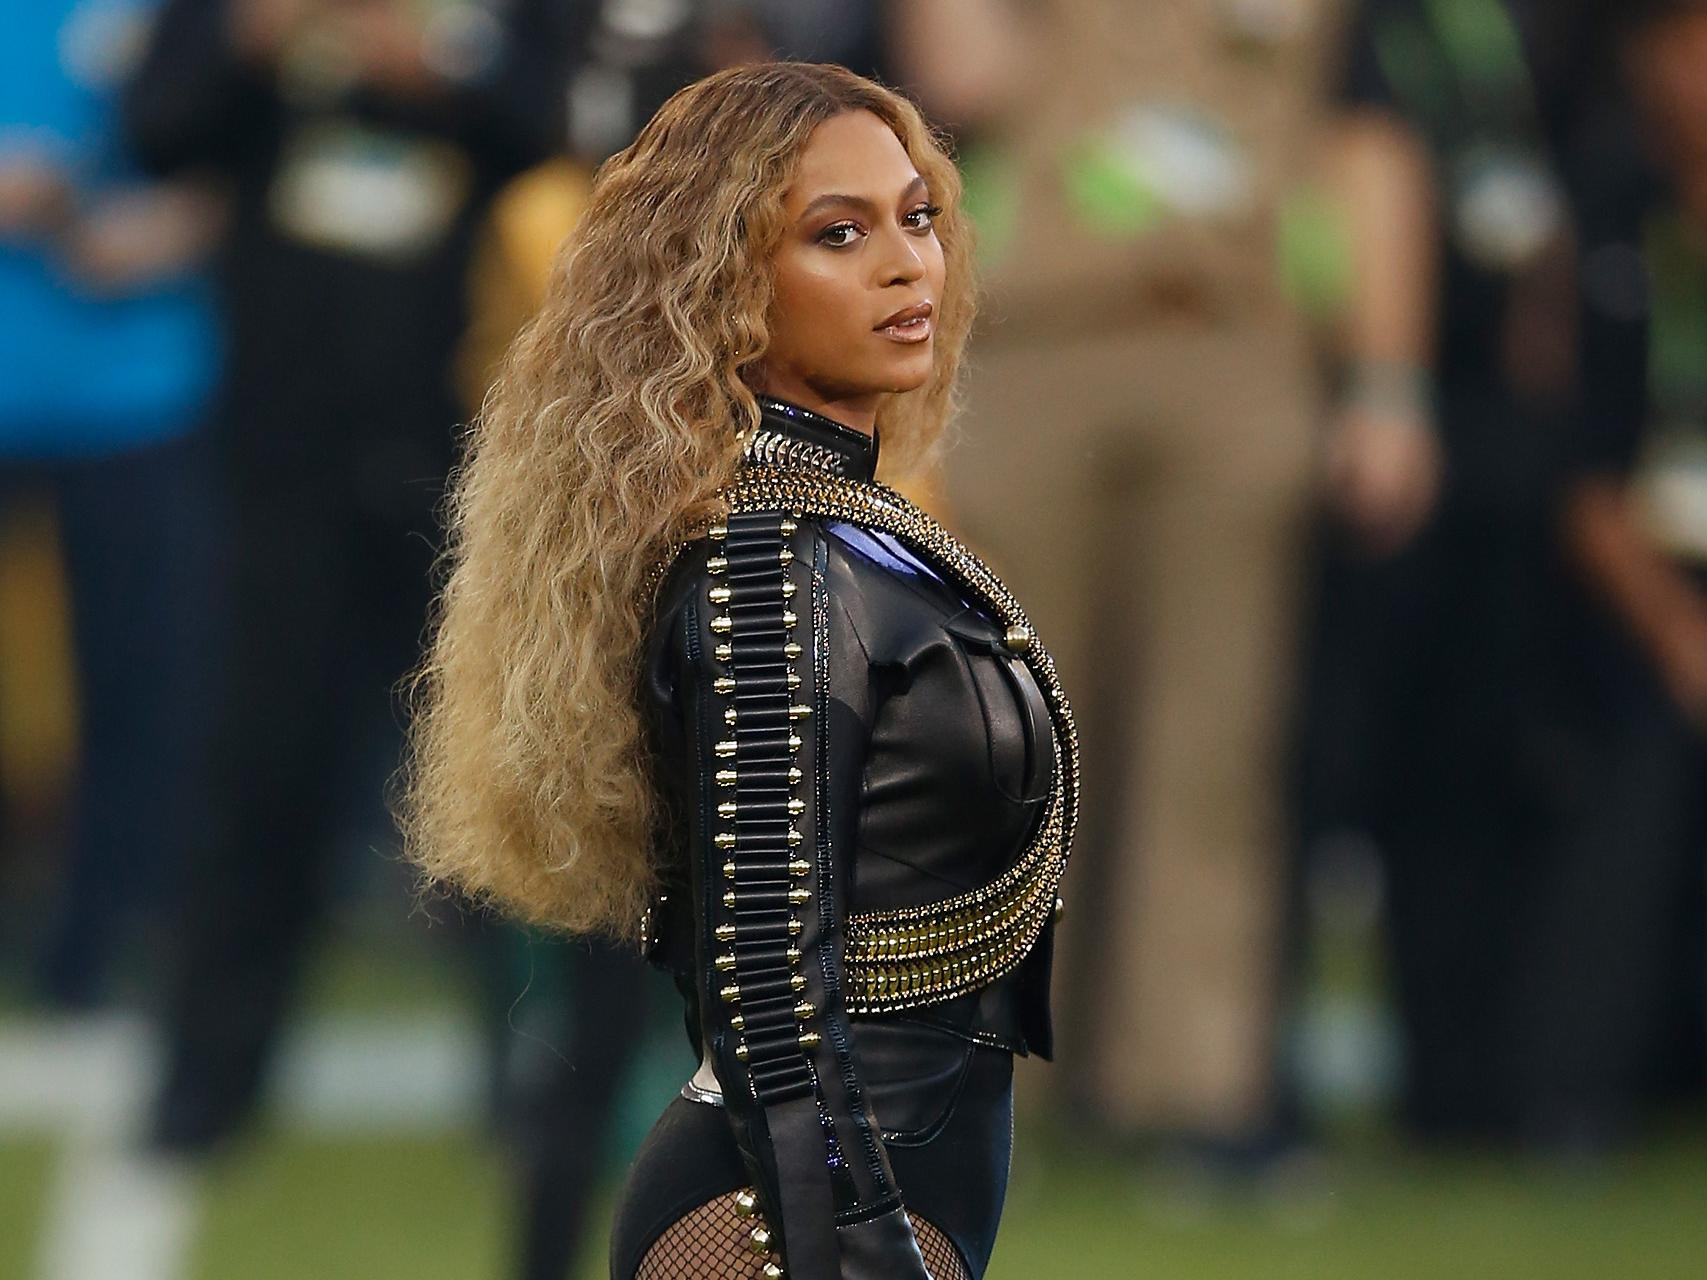 Beyoncé performs "Formation" at the Super Bowl 50 halftime show Ezra Shaw/Getty